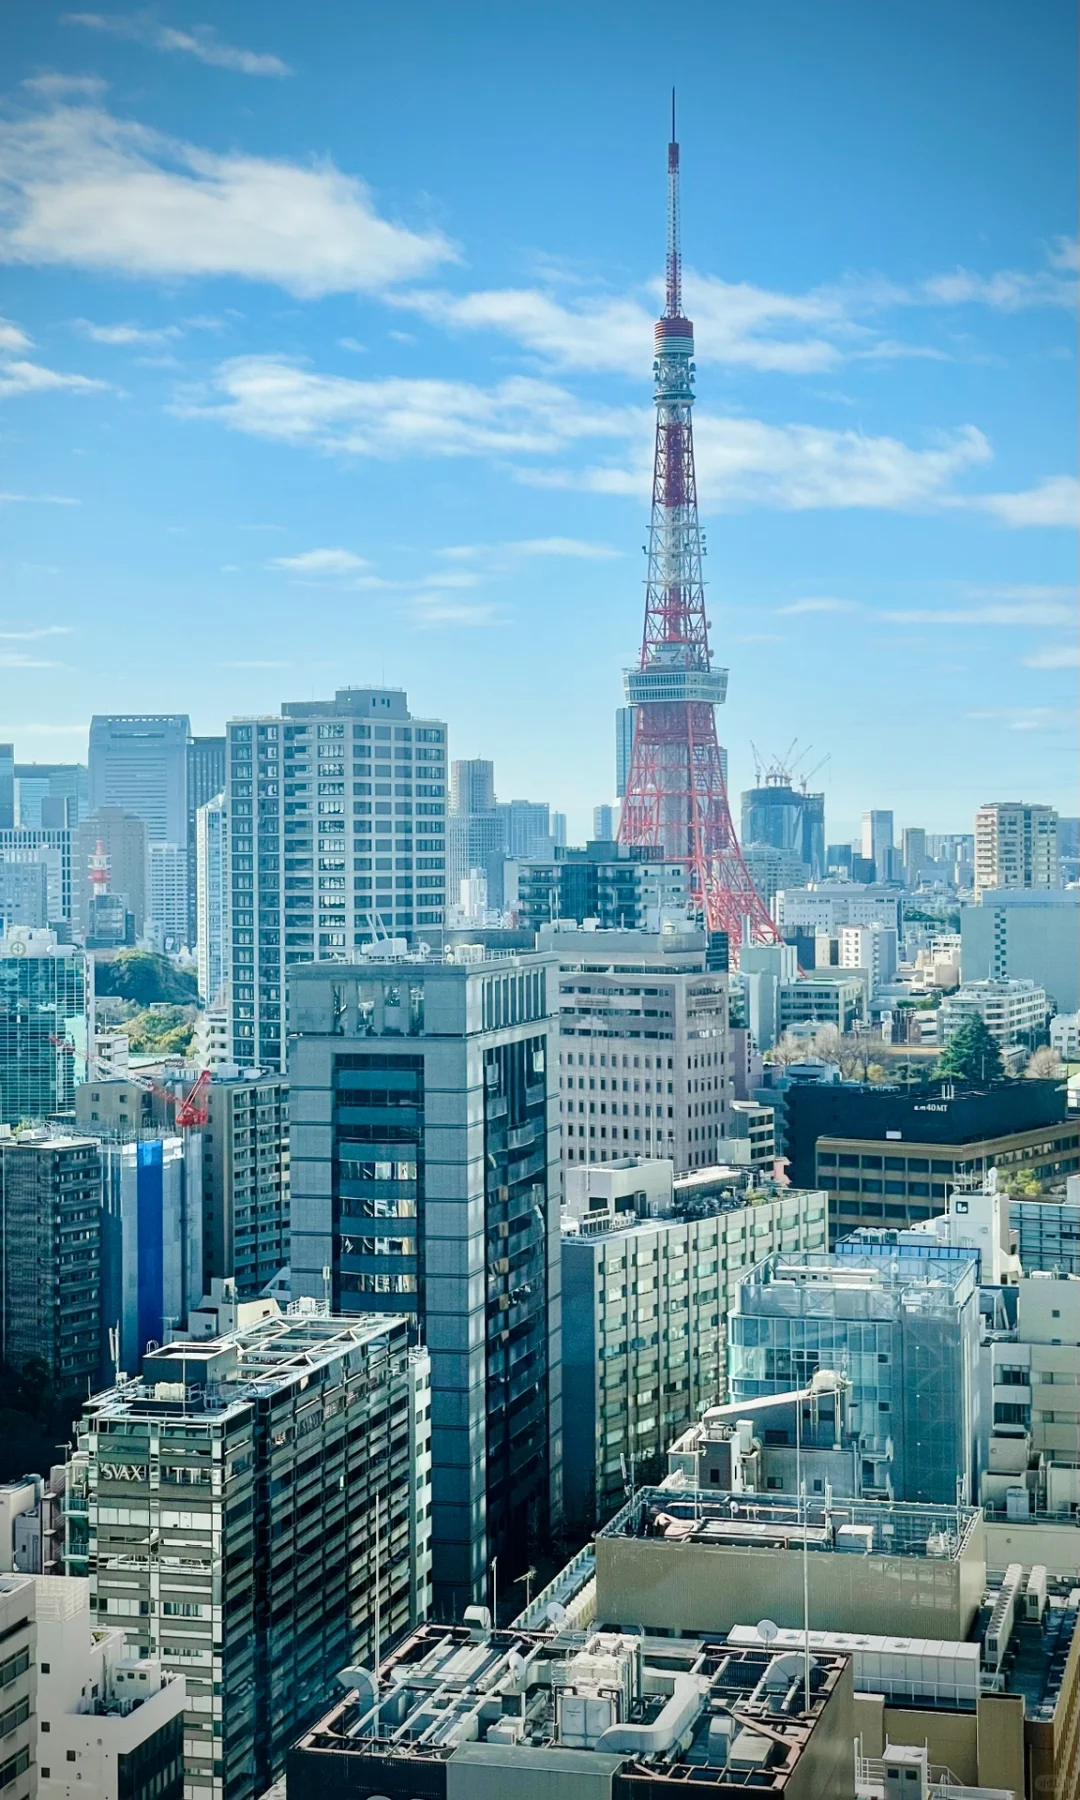 Tokyo-Hotel Toranomon Hills, Japan, with Tokyo Tower visible from the room